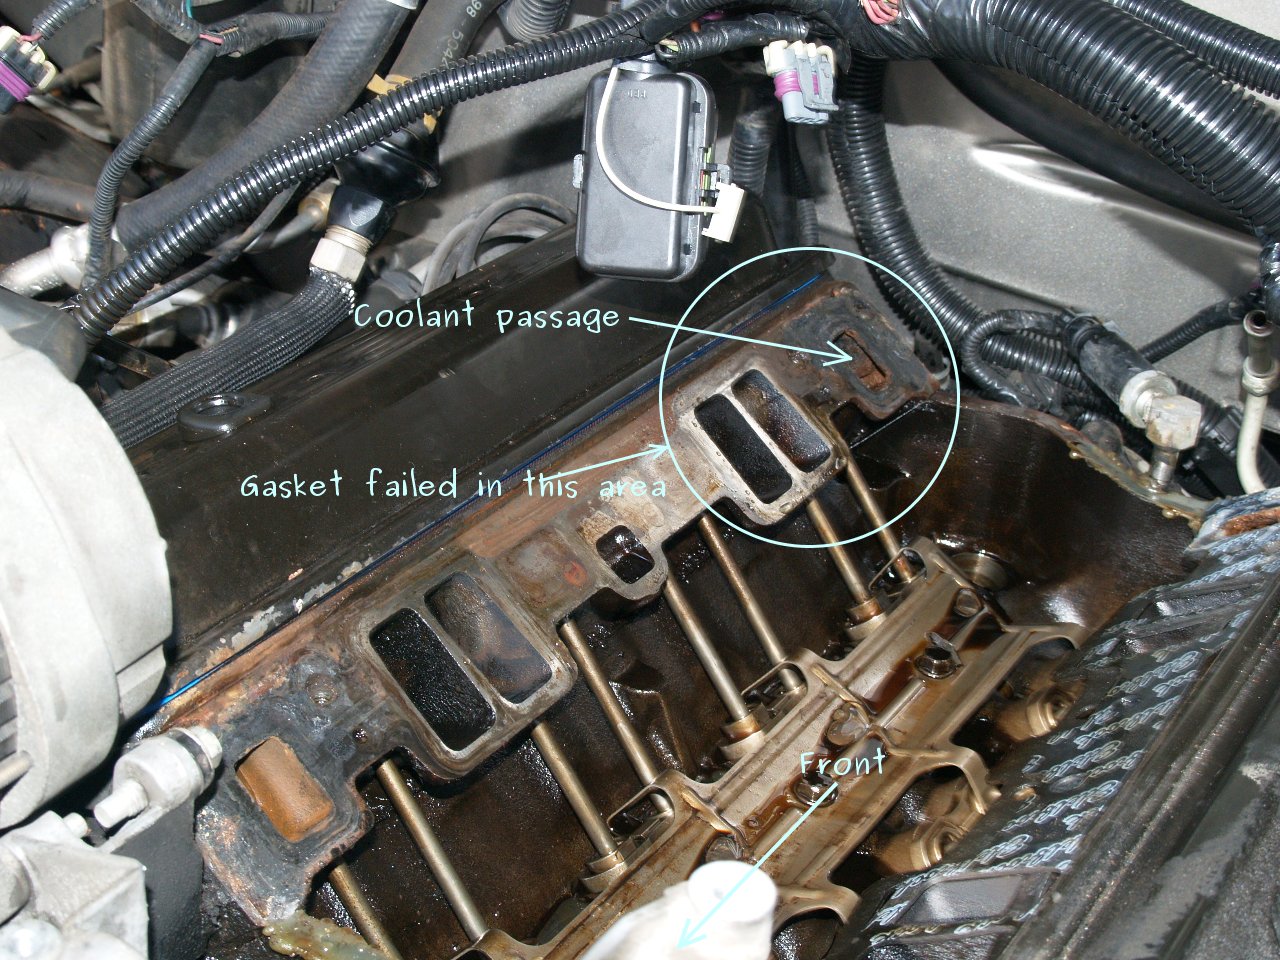 See C0106 in engine